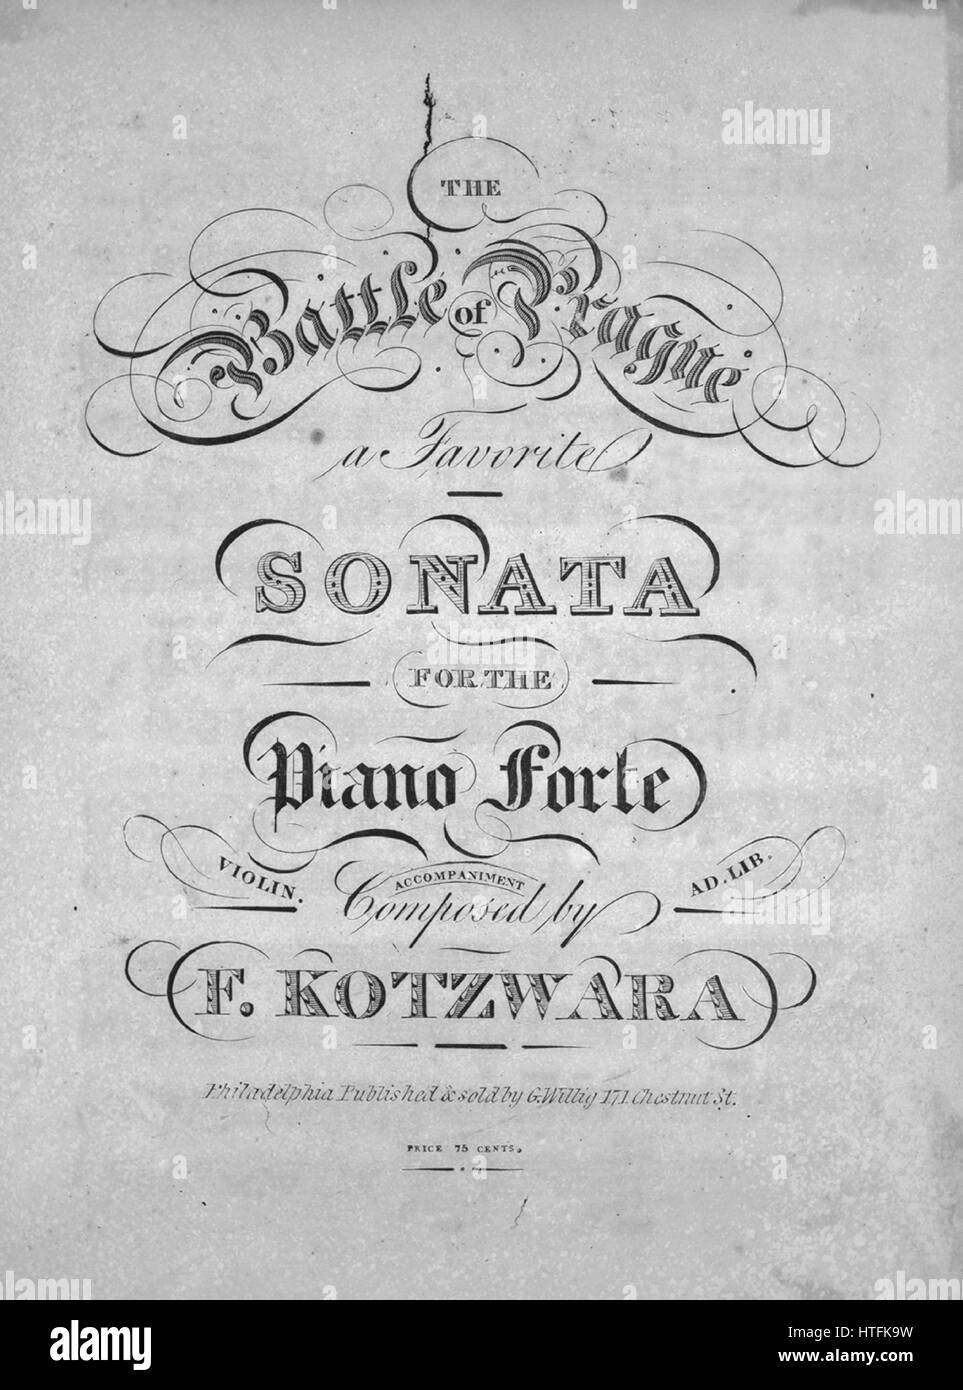 Sheet music cover image of the song 'The Battle of Prague A Favorite Sonata  for the Piano Forte Violin Accompaniment Ad Lib', with original authorship  notes reading 'Composed by F Kotzwara', United